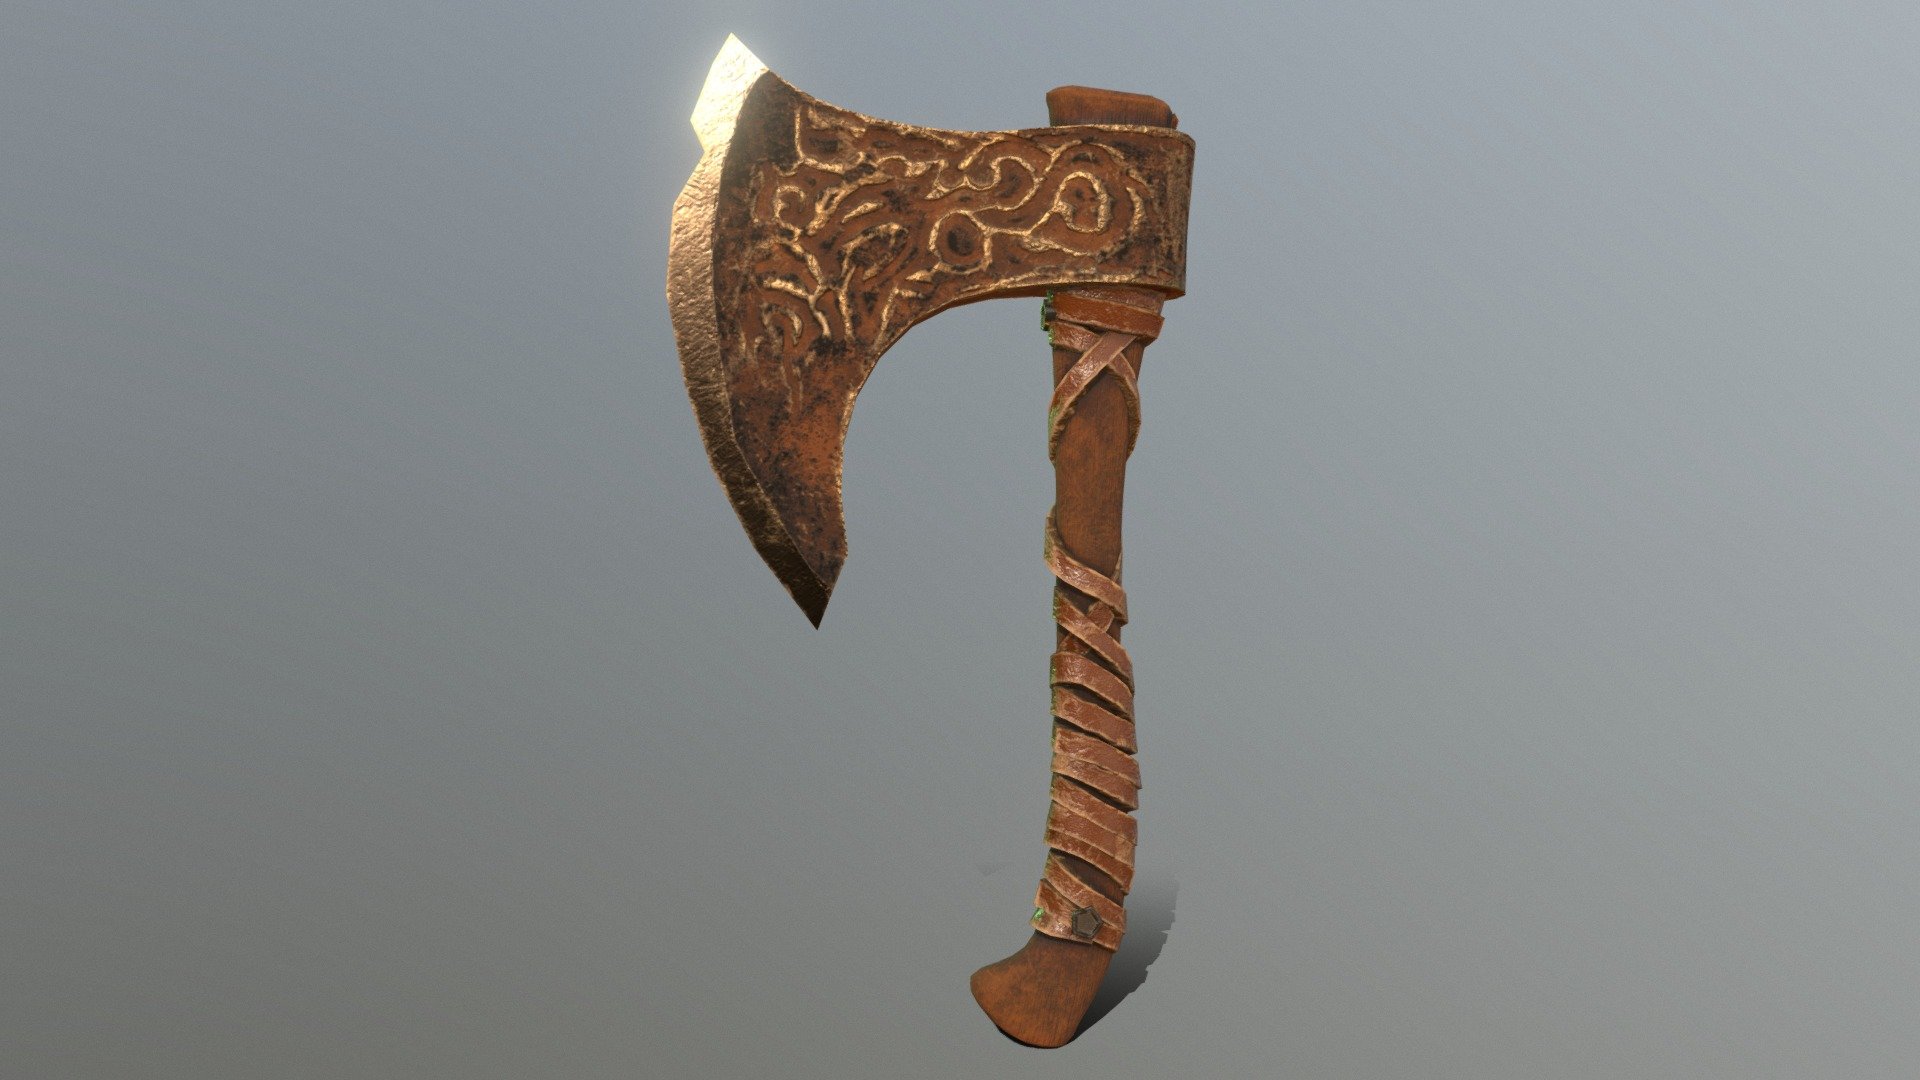 Feel free to ask for any support

Email : hardideaent@gmail.com
FB : https://www.facebook.com/HardIdeaEntertainmentStudio/
Twitter : https://twitter.com/hardideaent - HIE Viking Axe D180212 - Buy Royalty Free 3D model by HardIdea (@s86b16) 3d model